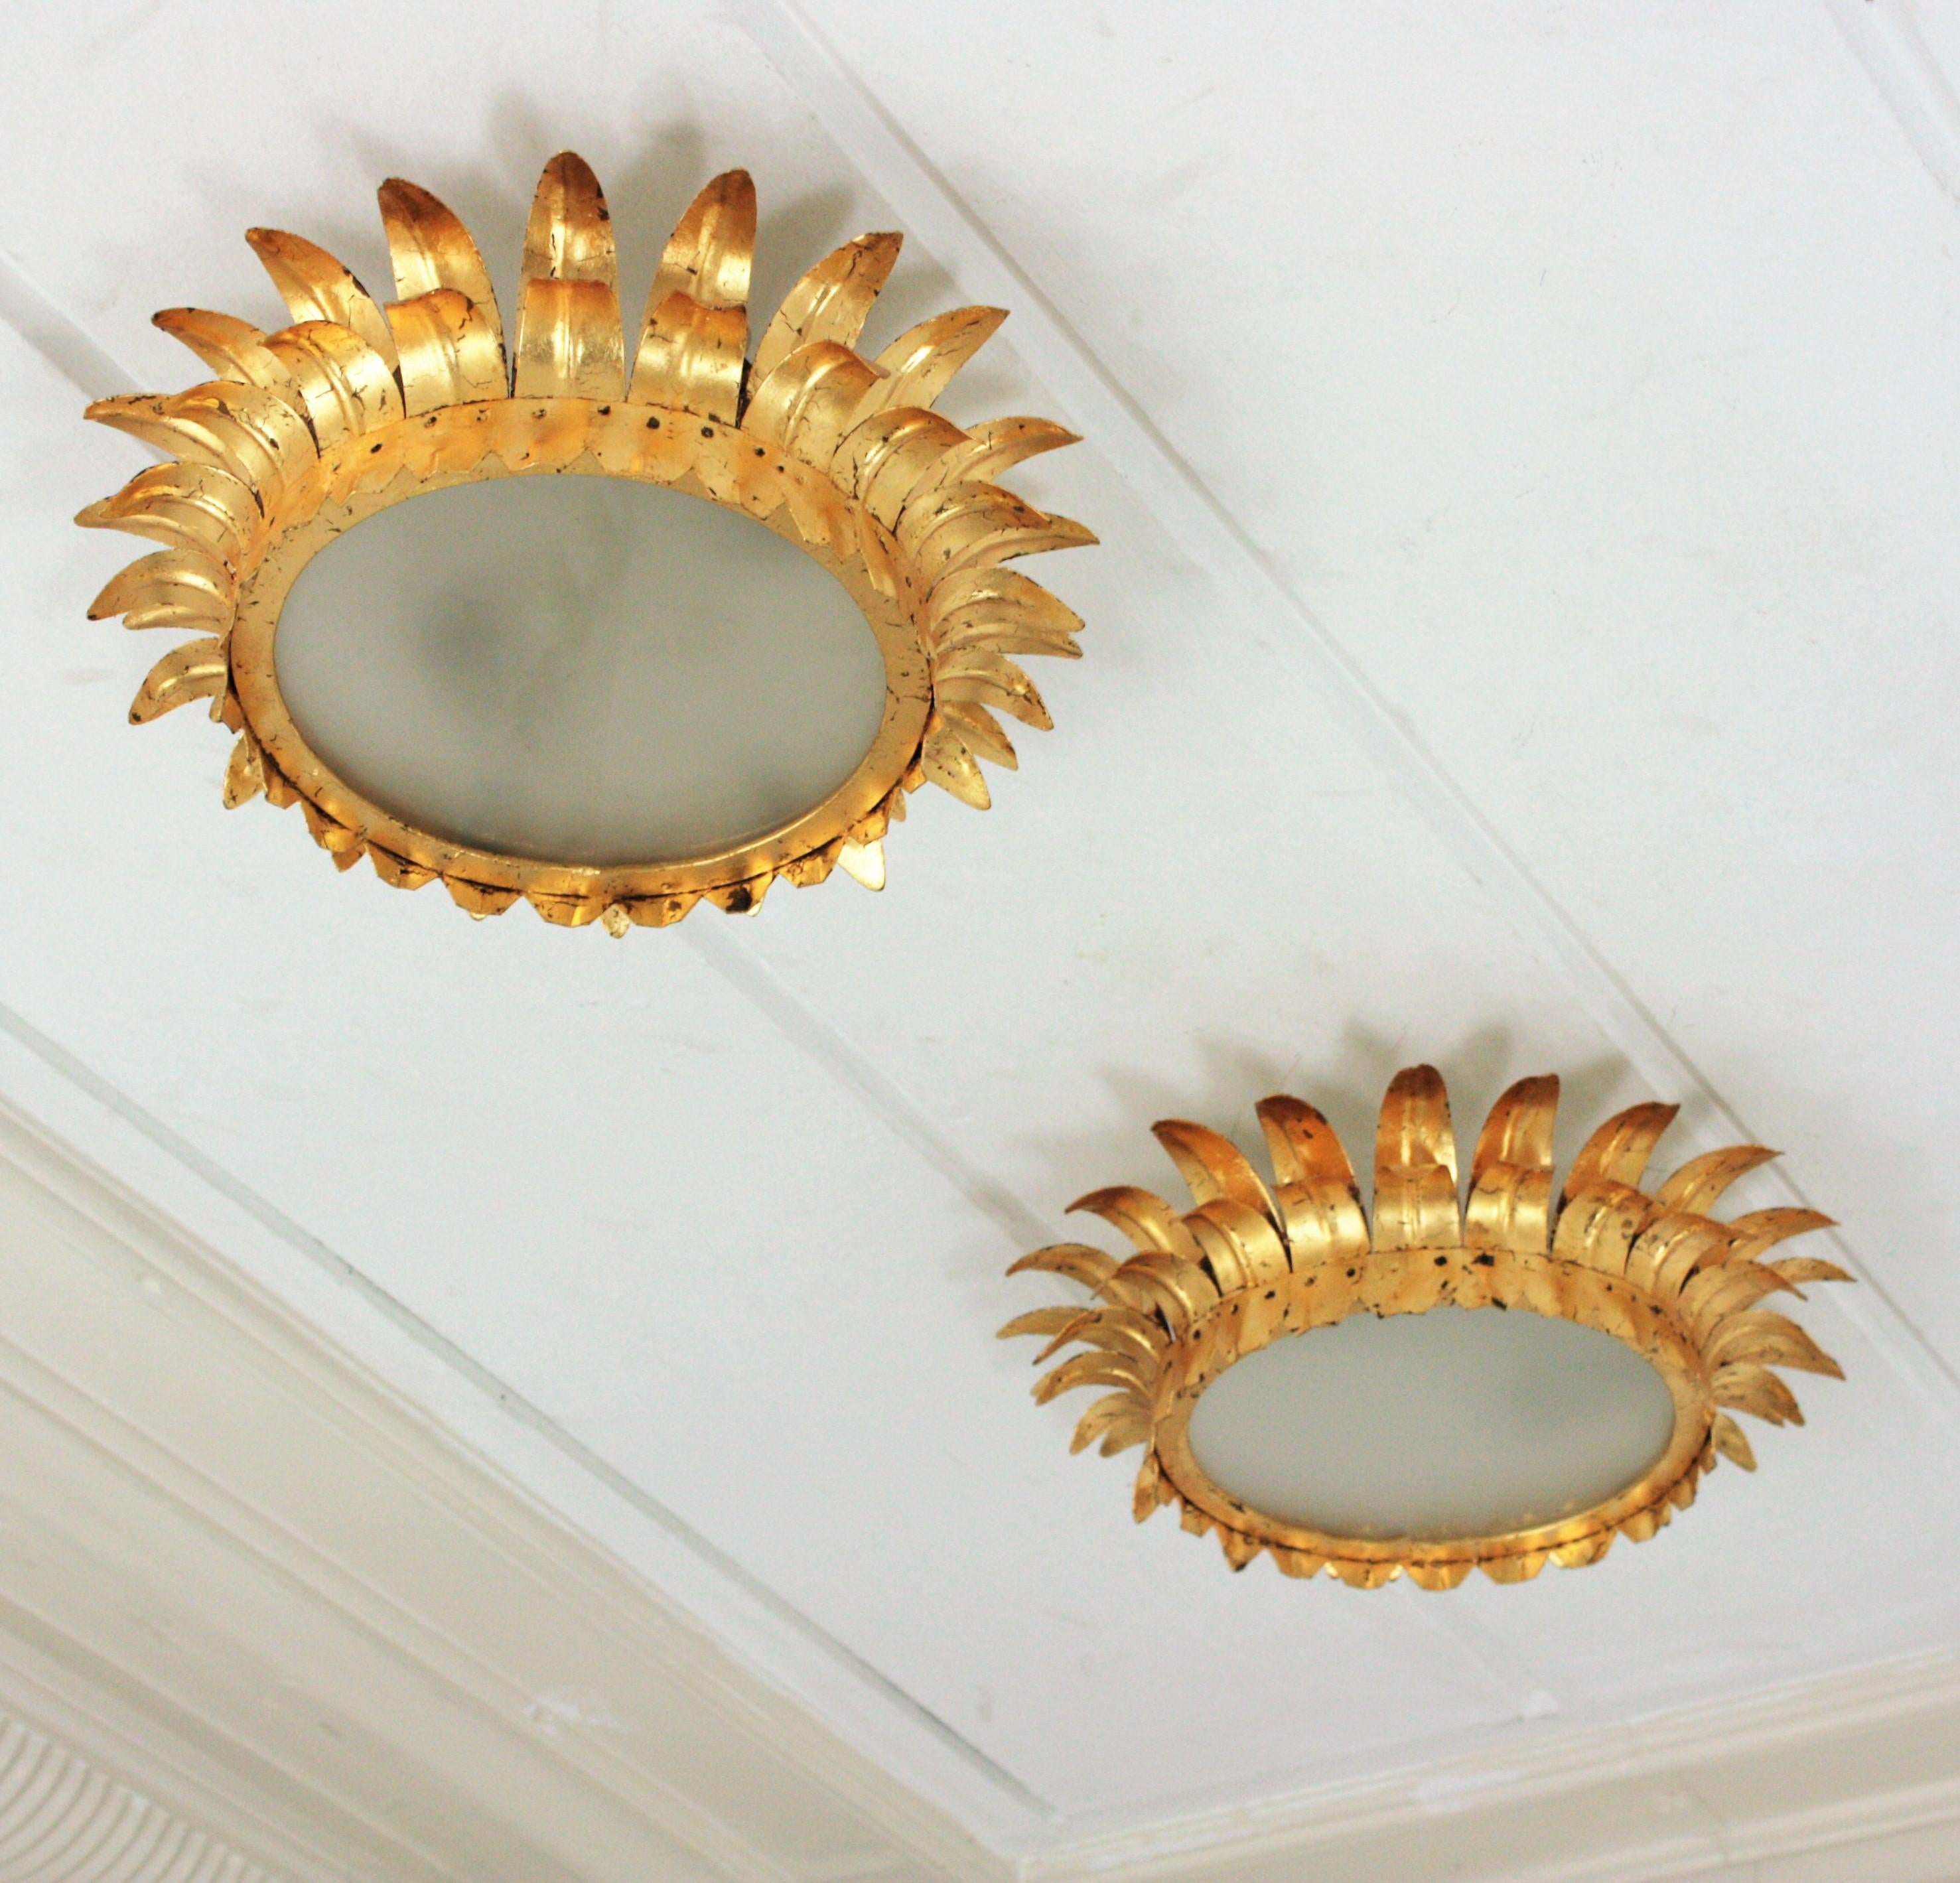 Pair of neoclassical style gilt iron leafed crown light fixtures or pendants. France, 1940s.
Handcrafted in iron and covered with gold leaf. They wear frosted glass panels. Nice aged patina
Place the flush mounted or as pendants hanging from a